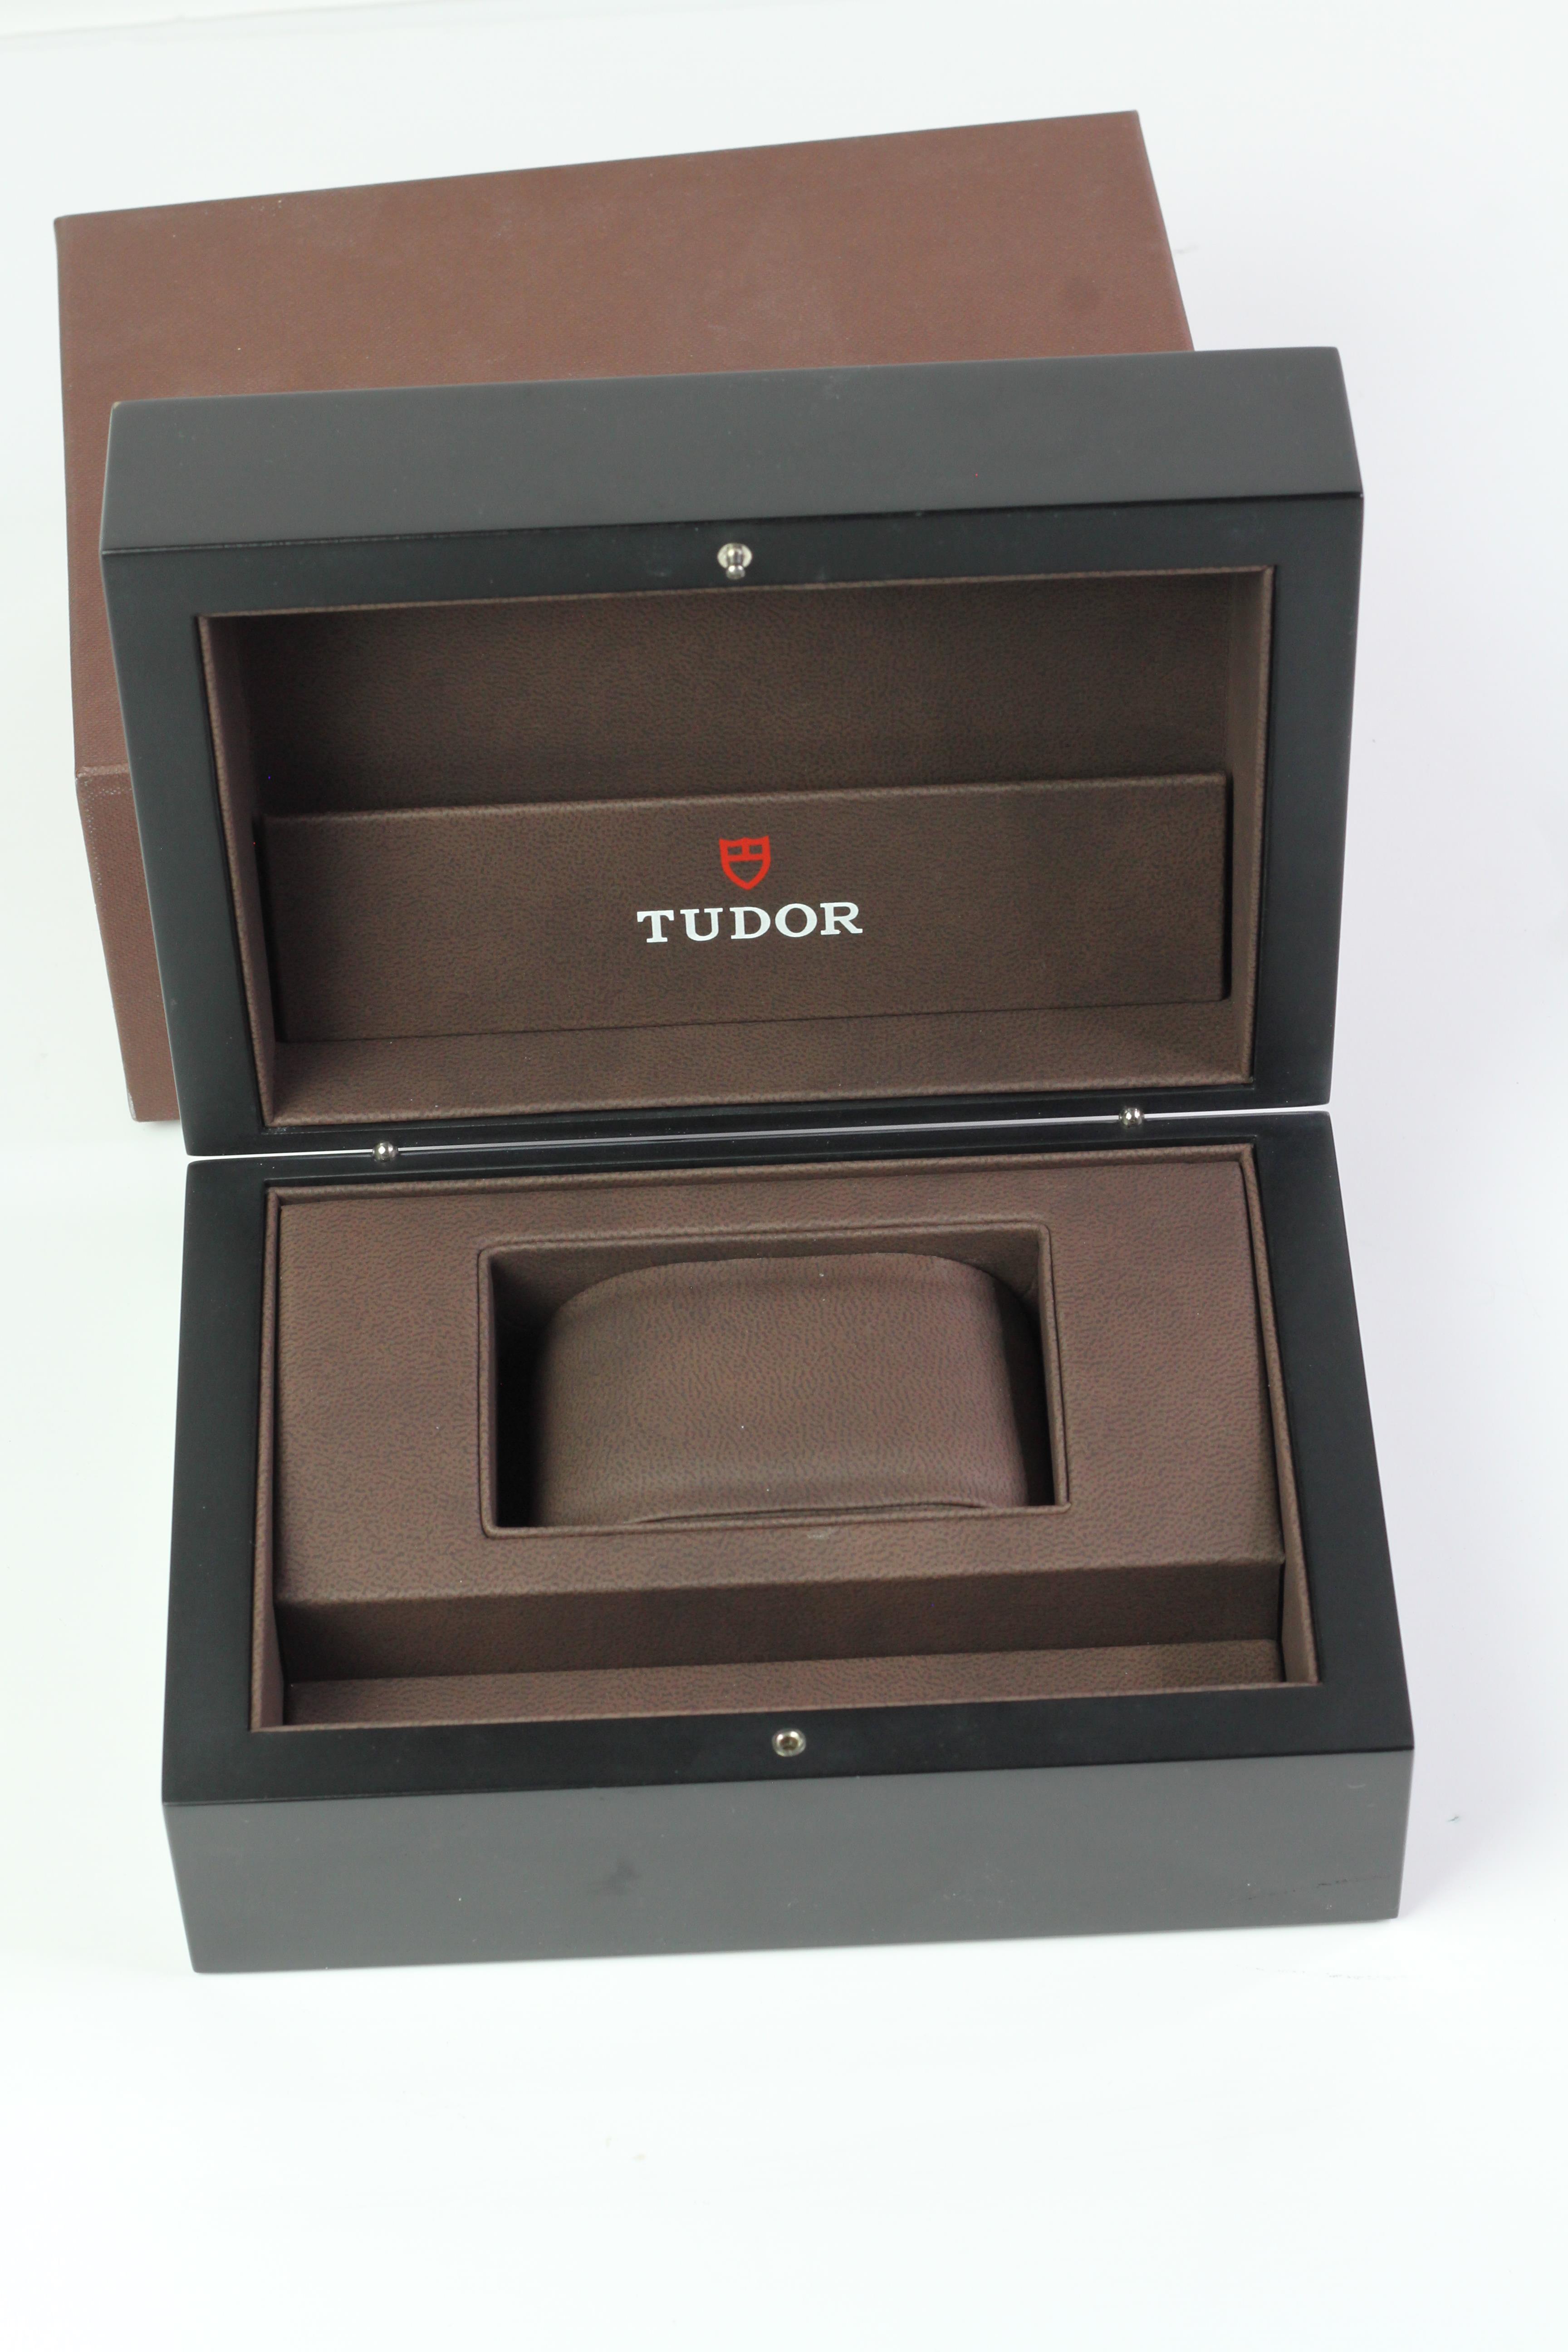 *To Be Sold Without Reserve" Modern Tudor inner and outer box - Image 3 of 3